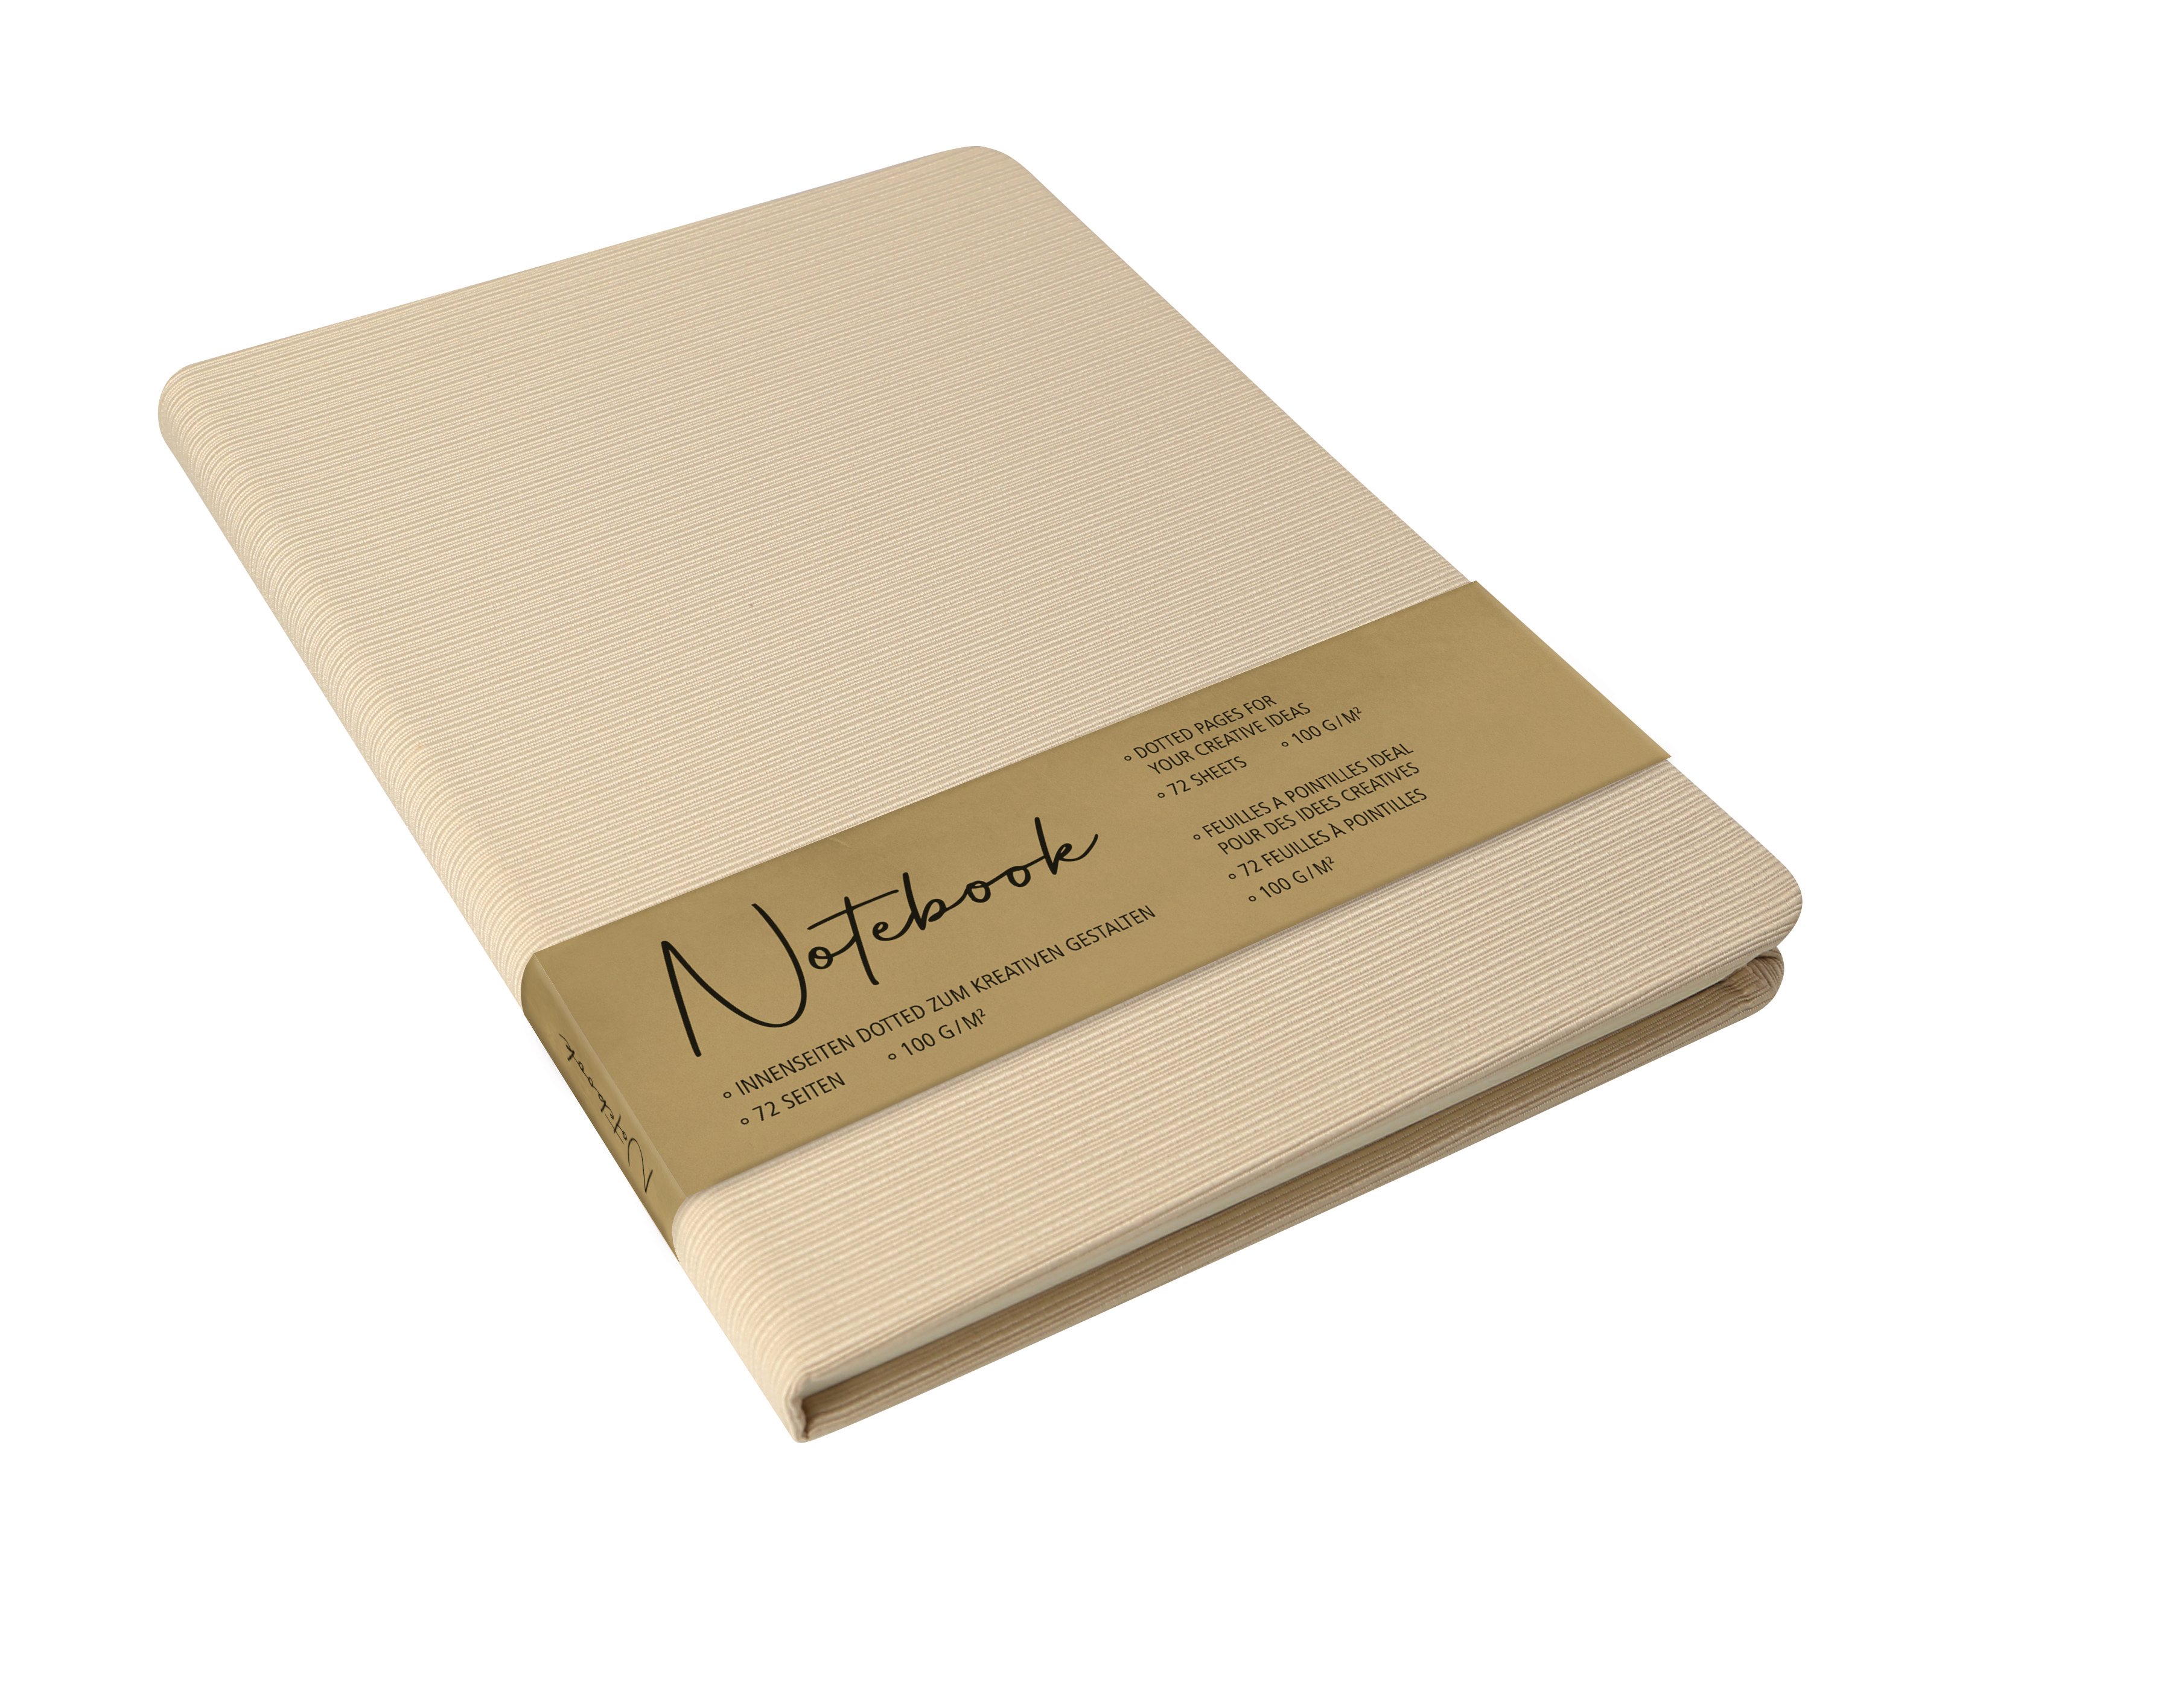 ONLINE Carnet A5 08372/6 beige, 72 pages, dotted